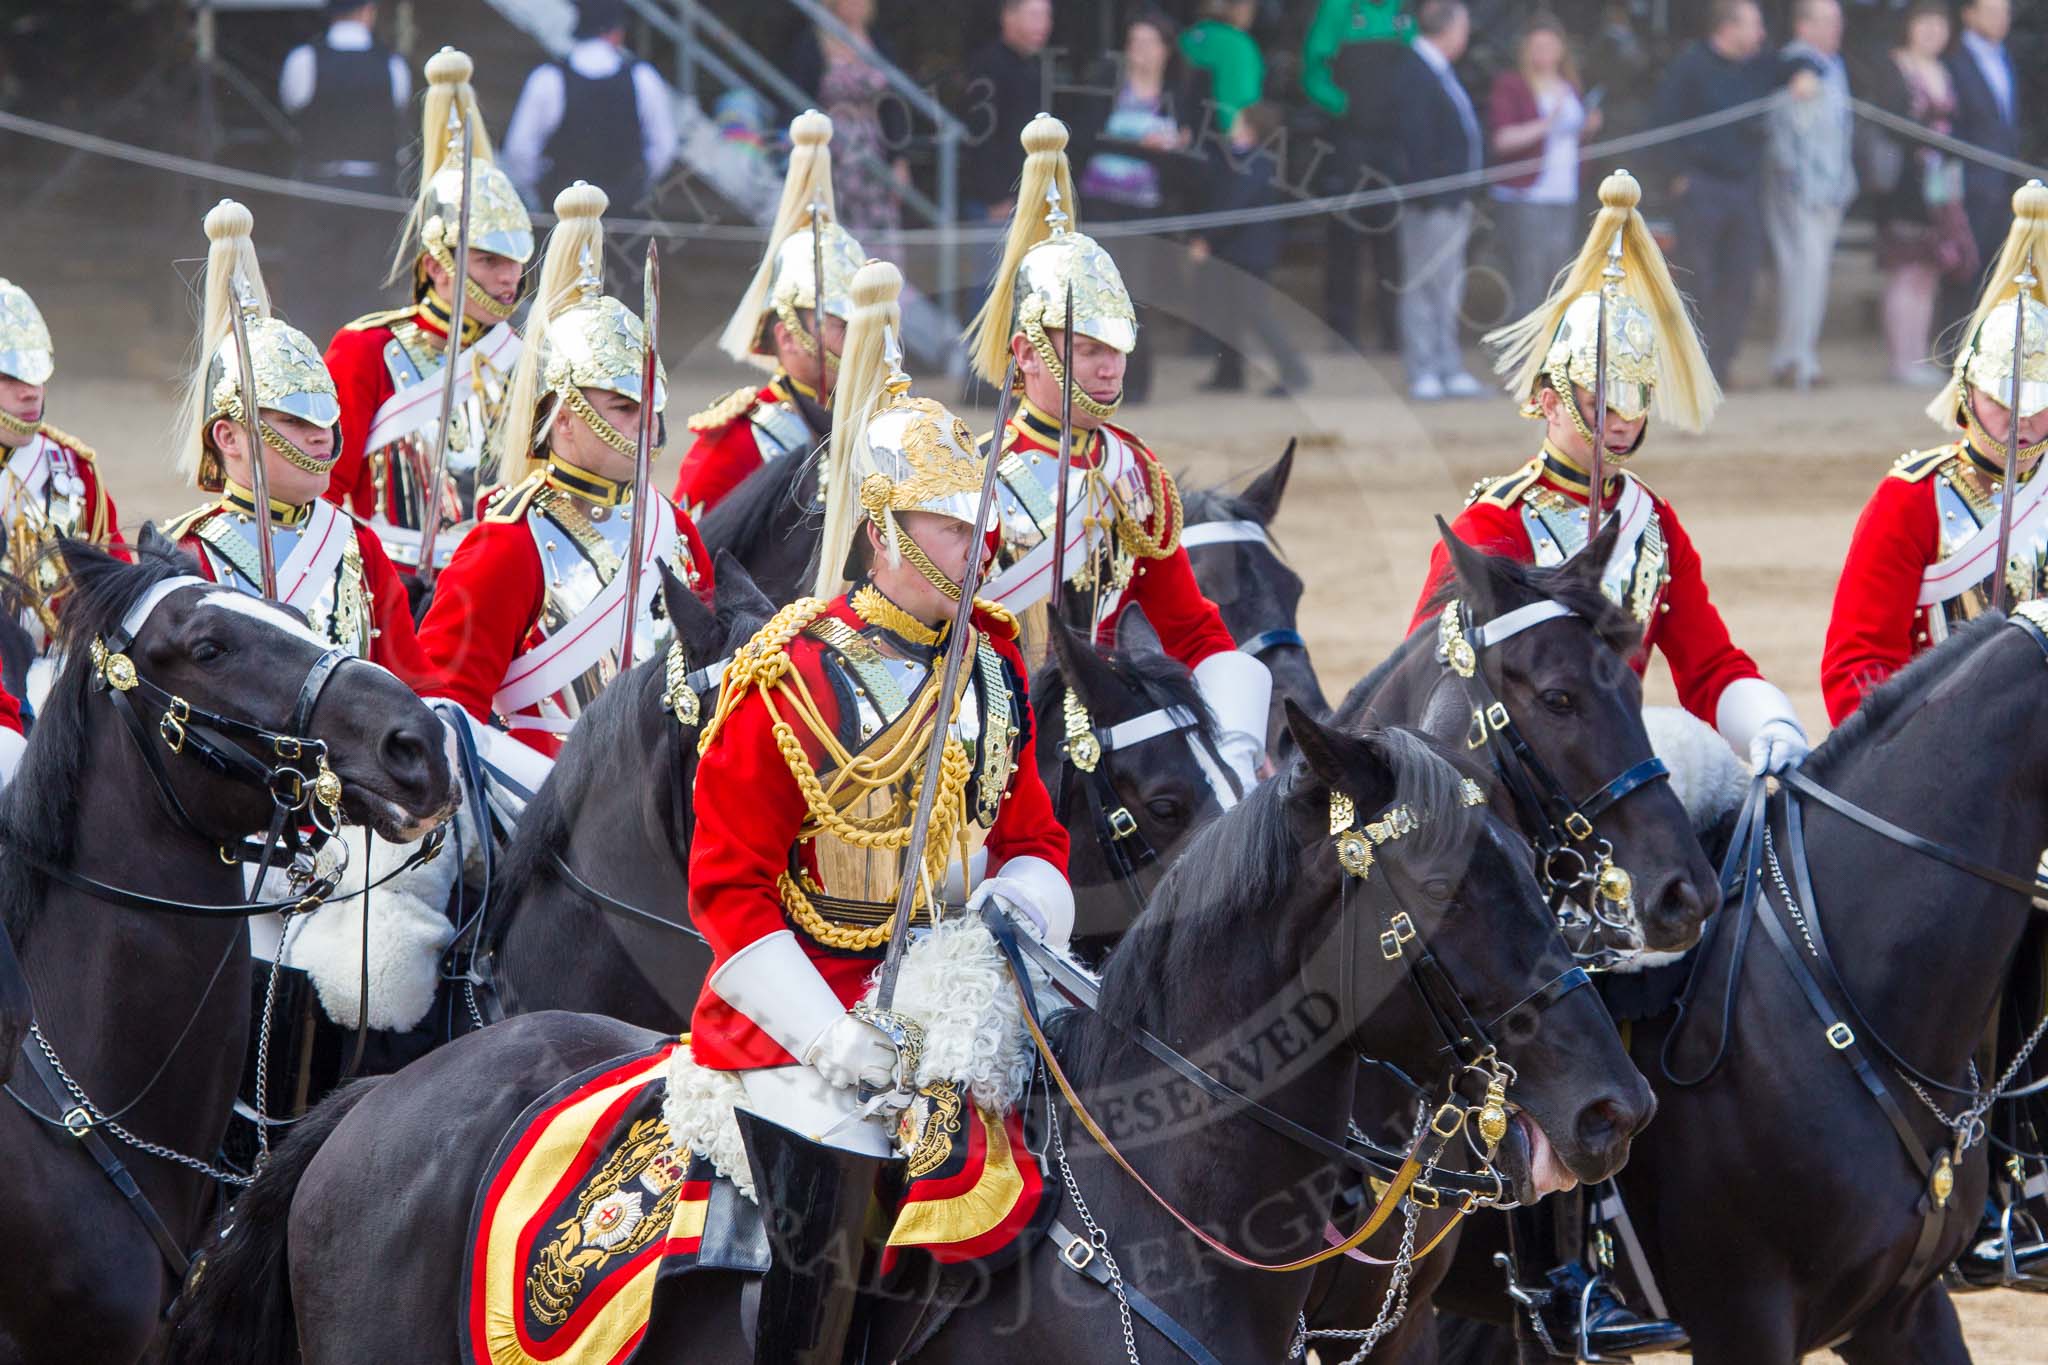 The Colonel's Review 2013: The First and Second Divisions of the Sovereign's Escort, The Life Guards, during the Ride Past..
Horse Guards Parade, Westminster,
London SW1,

United Kingdom,
on 08 June 2013 at 11:57, image #778